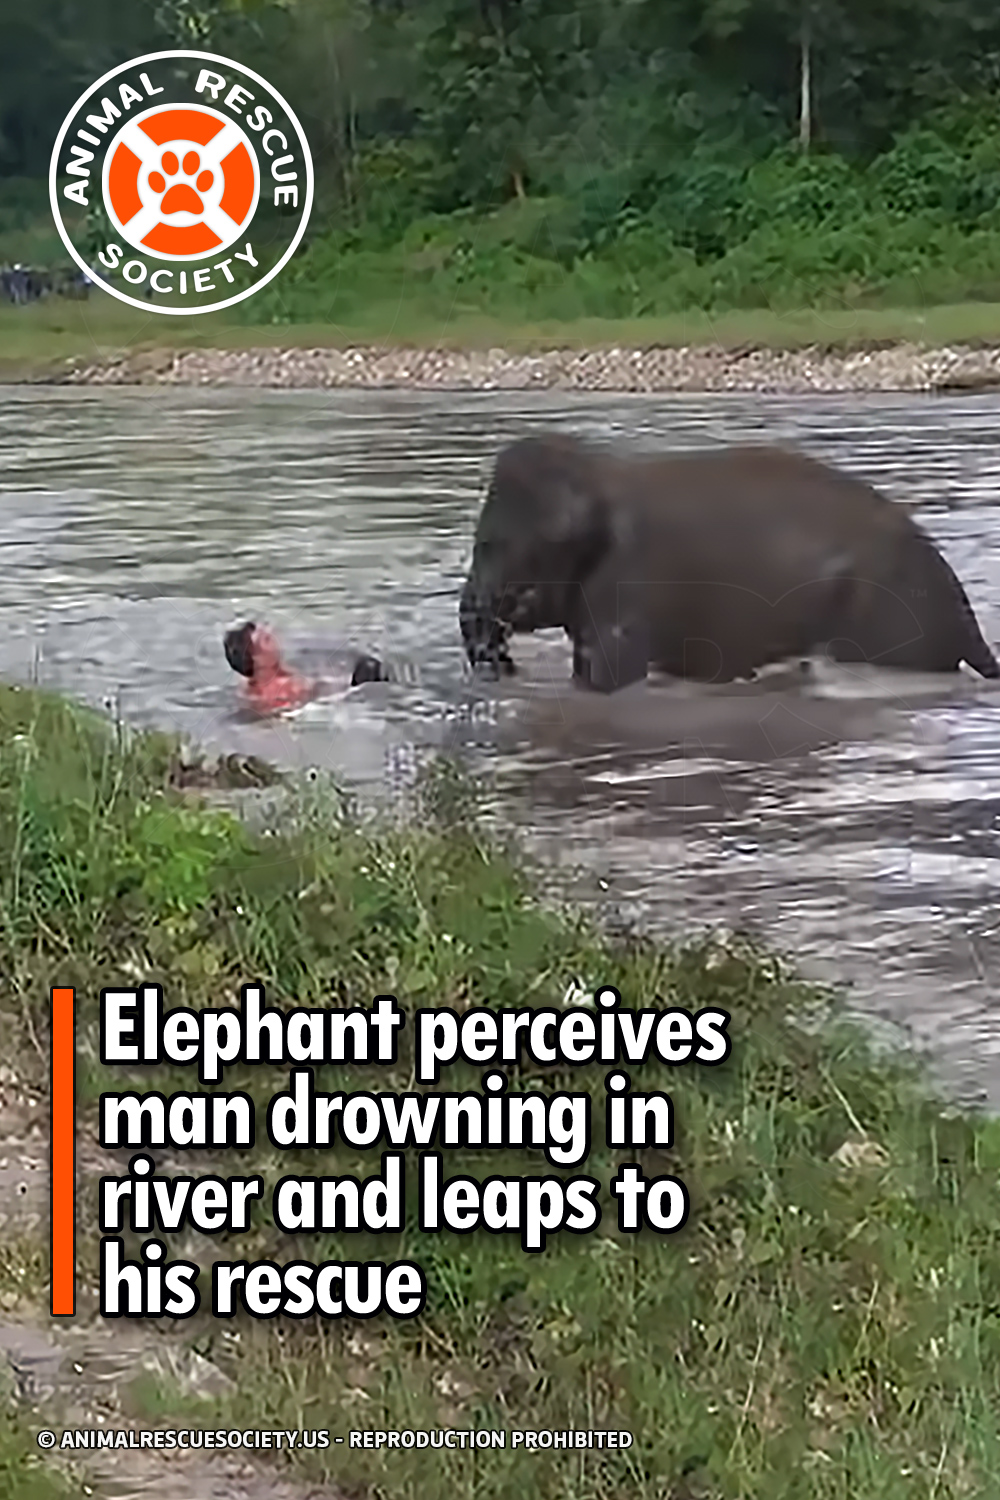 Elephant perceives man drowning in river and leaps to his rescue